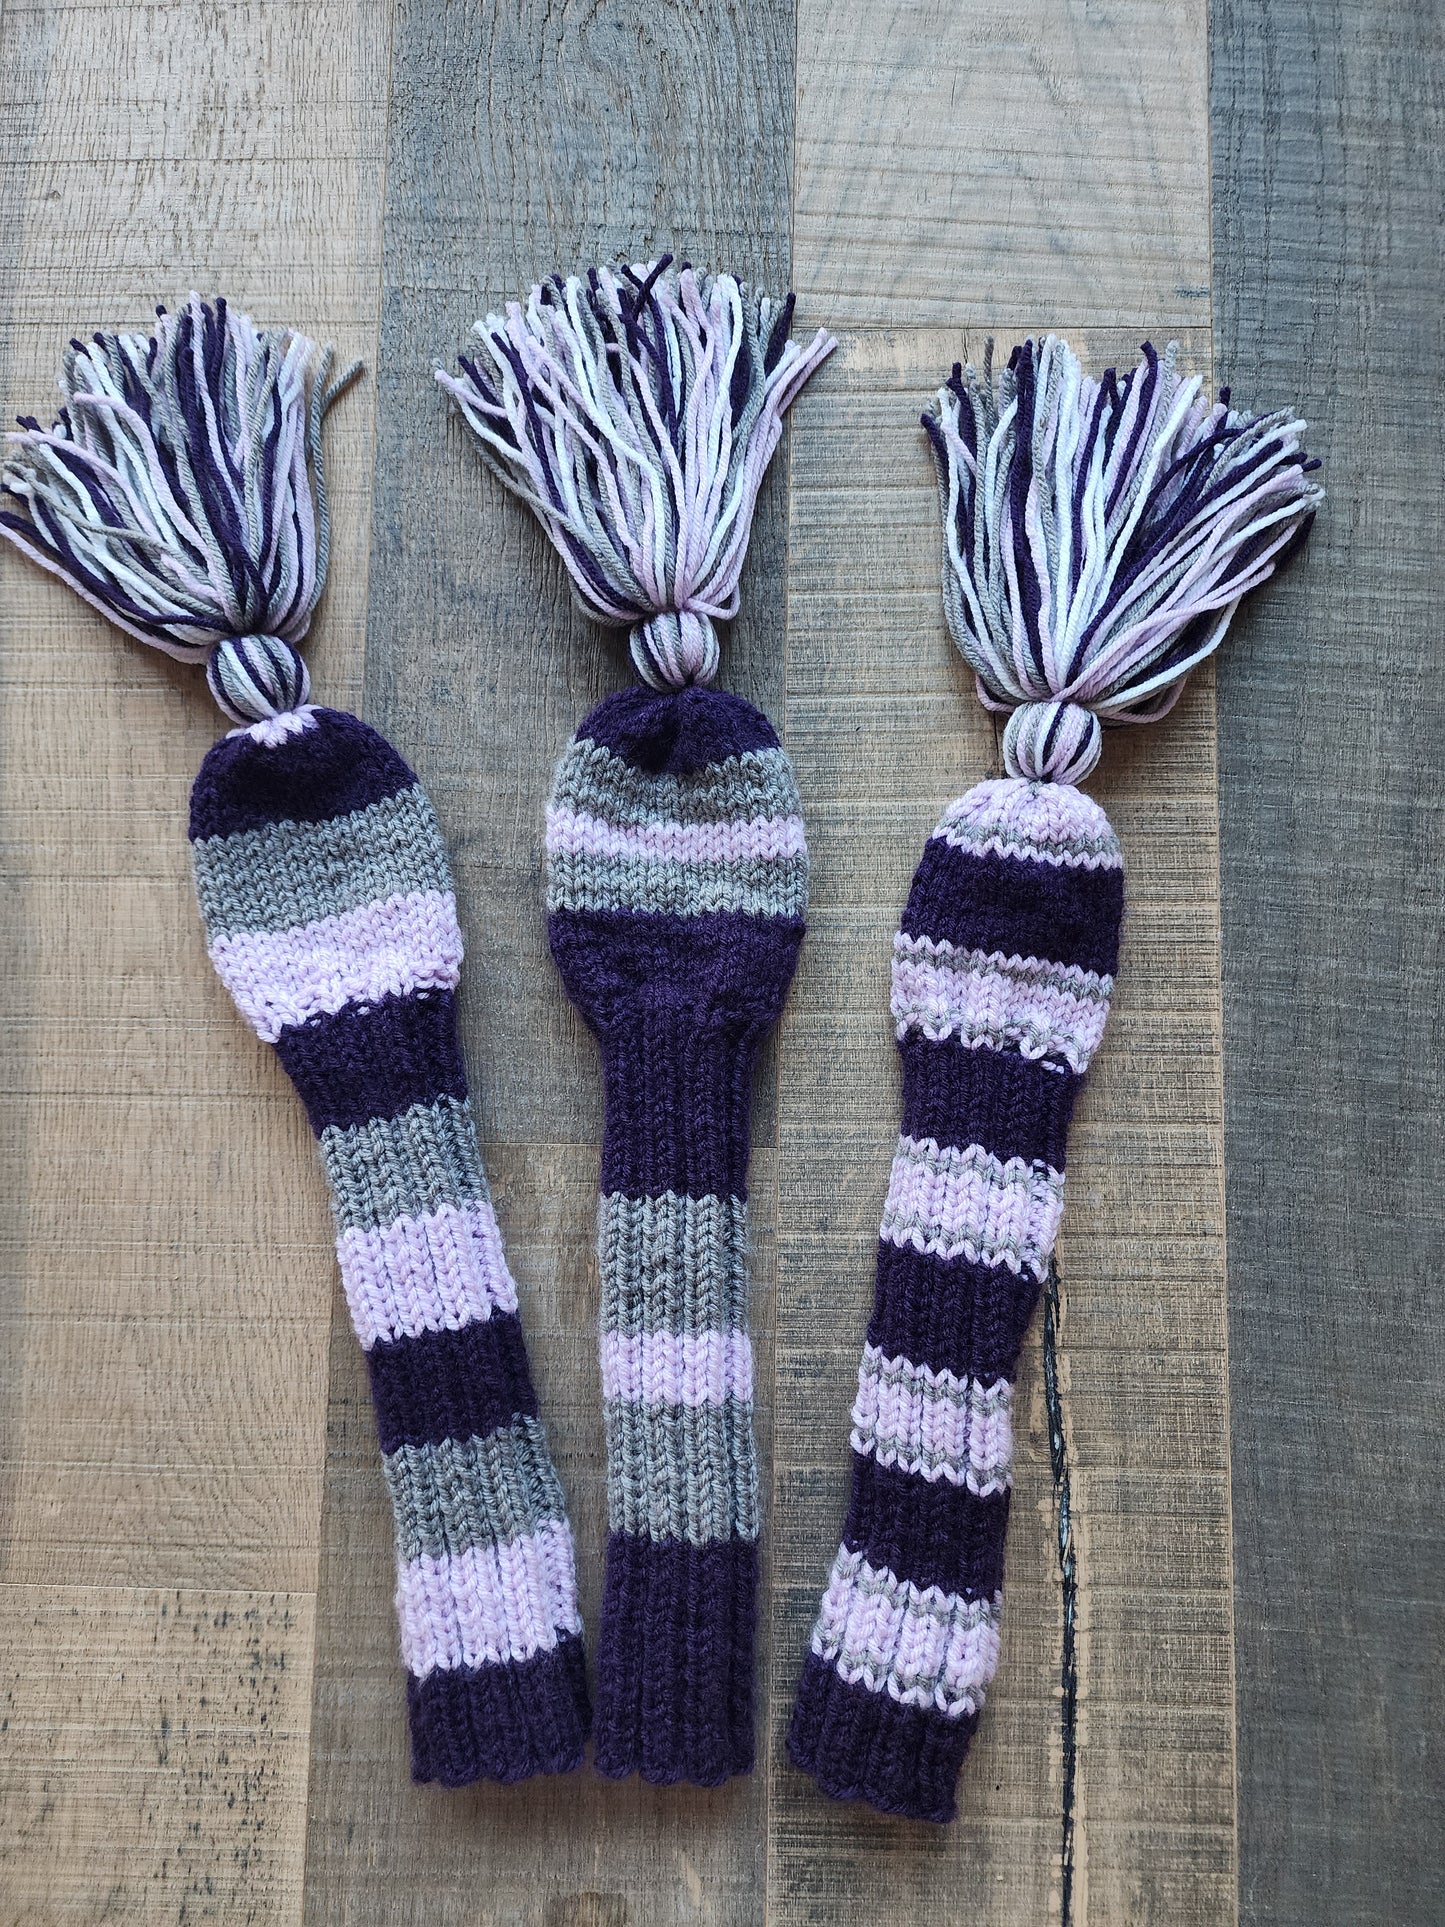 Three Golf Club Head Covers Retro-Vintage Purple & Gray with Tassels for Drivers, Woods